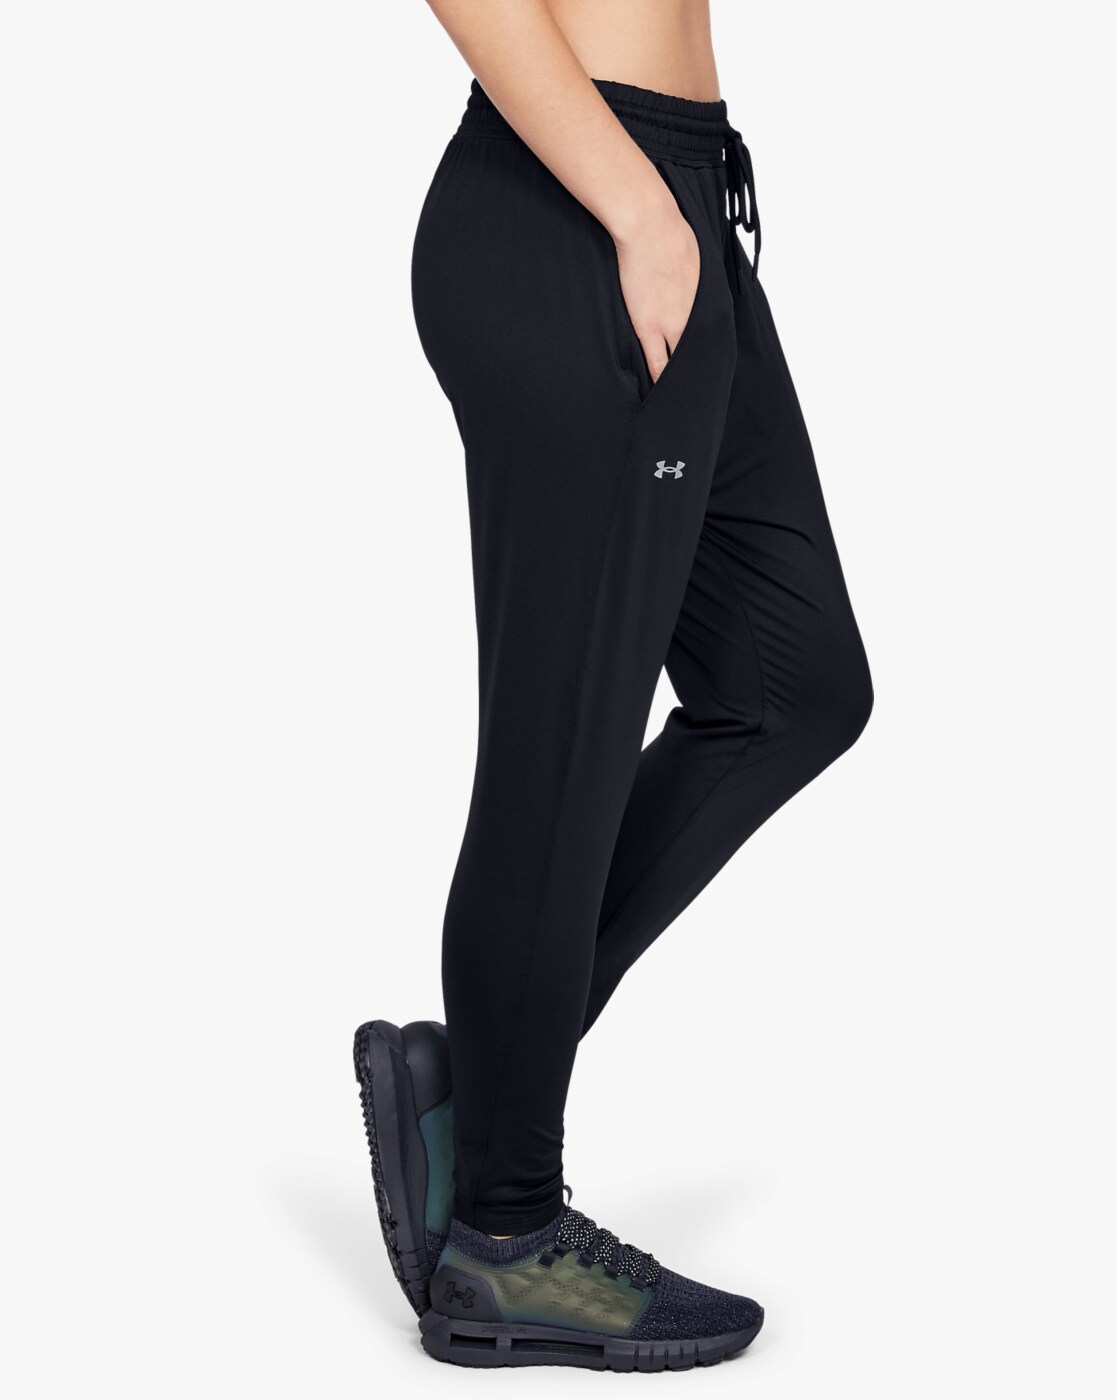 Buy Black Trousers & Pants for Women by Under Armour Online